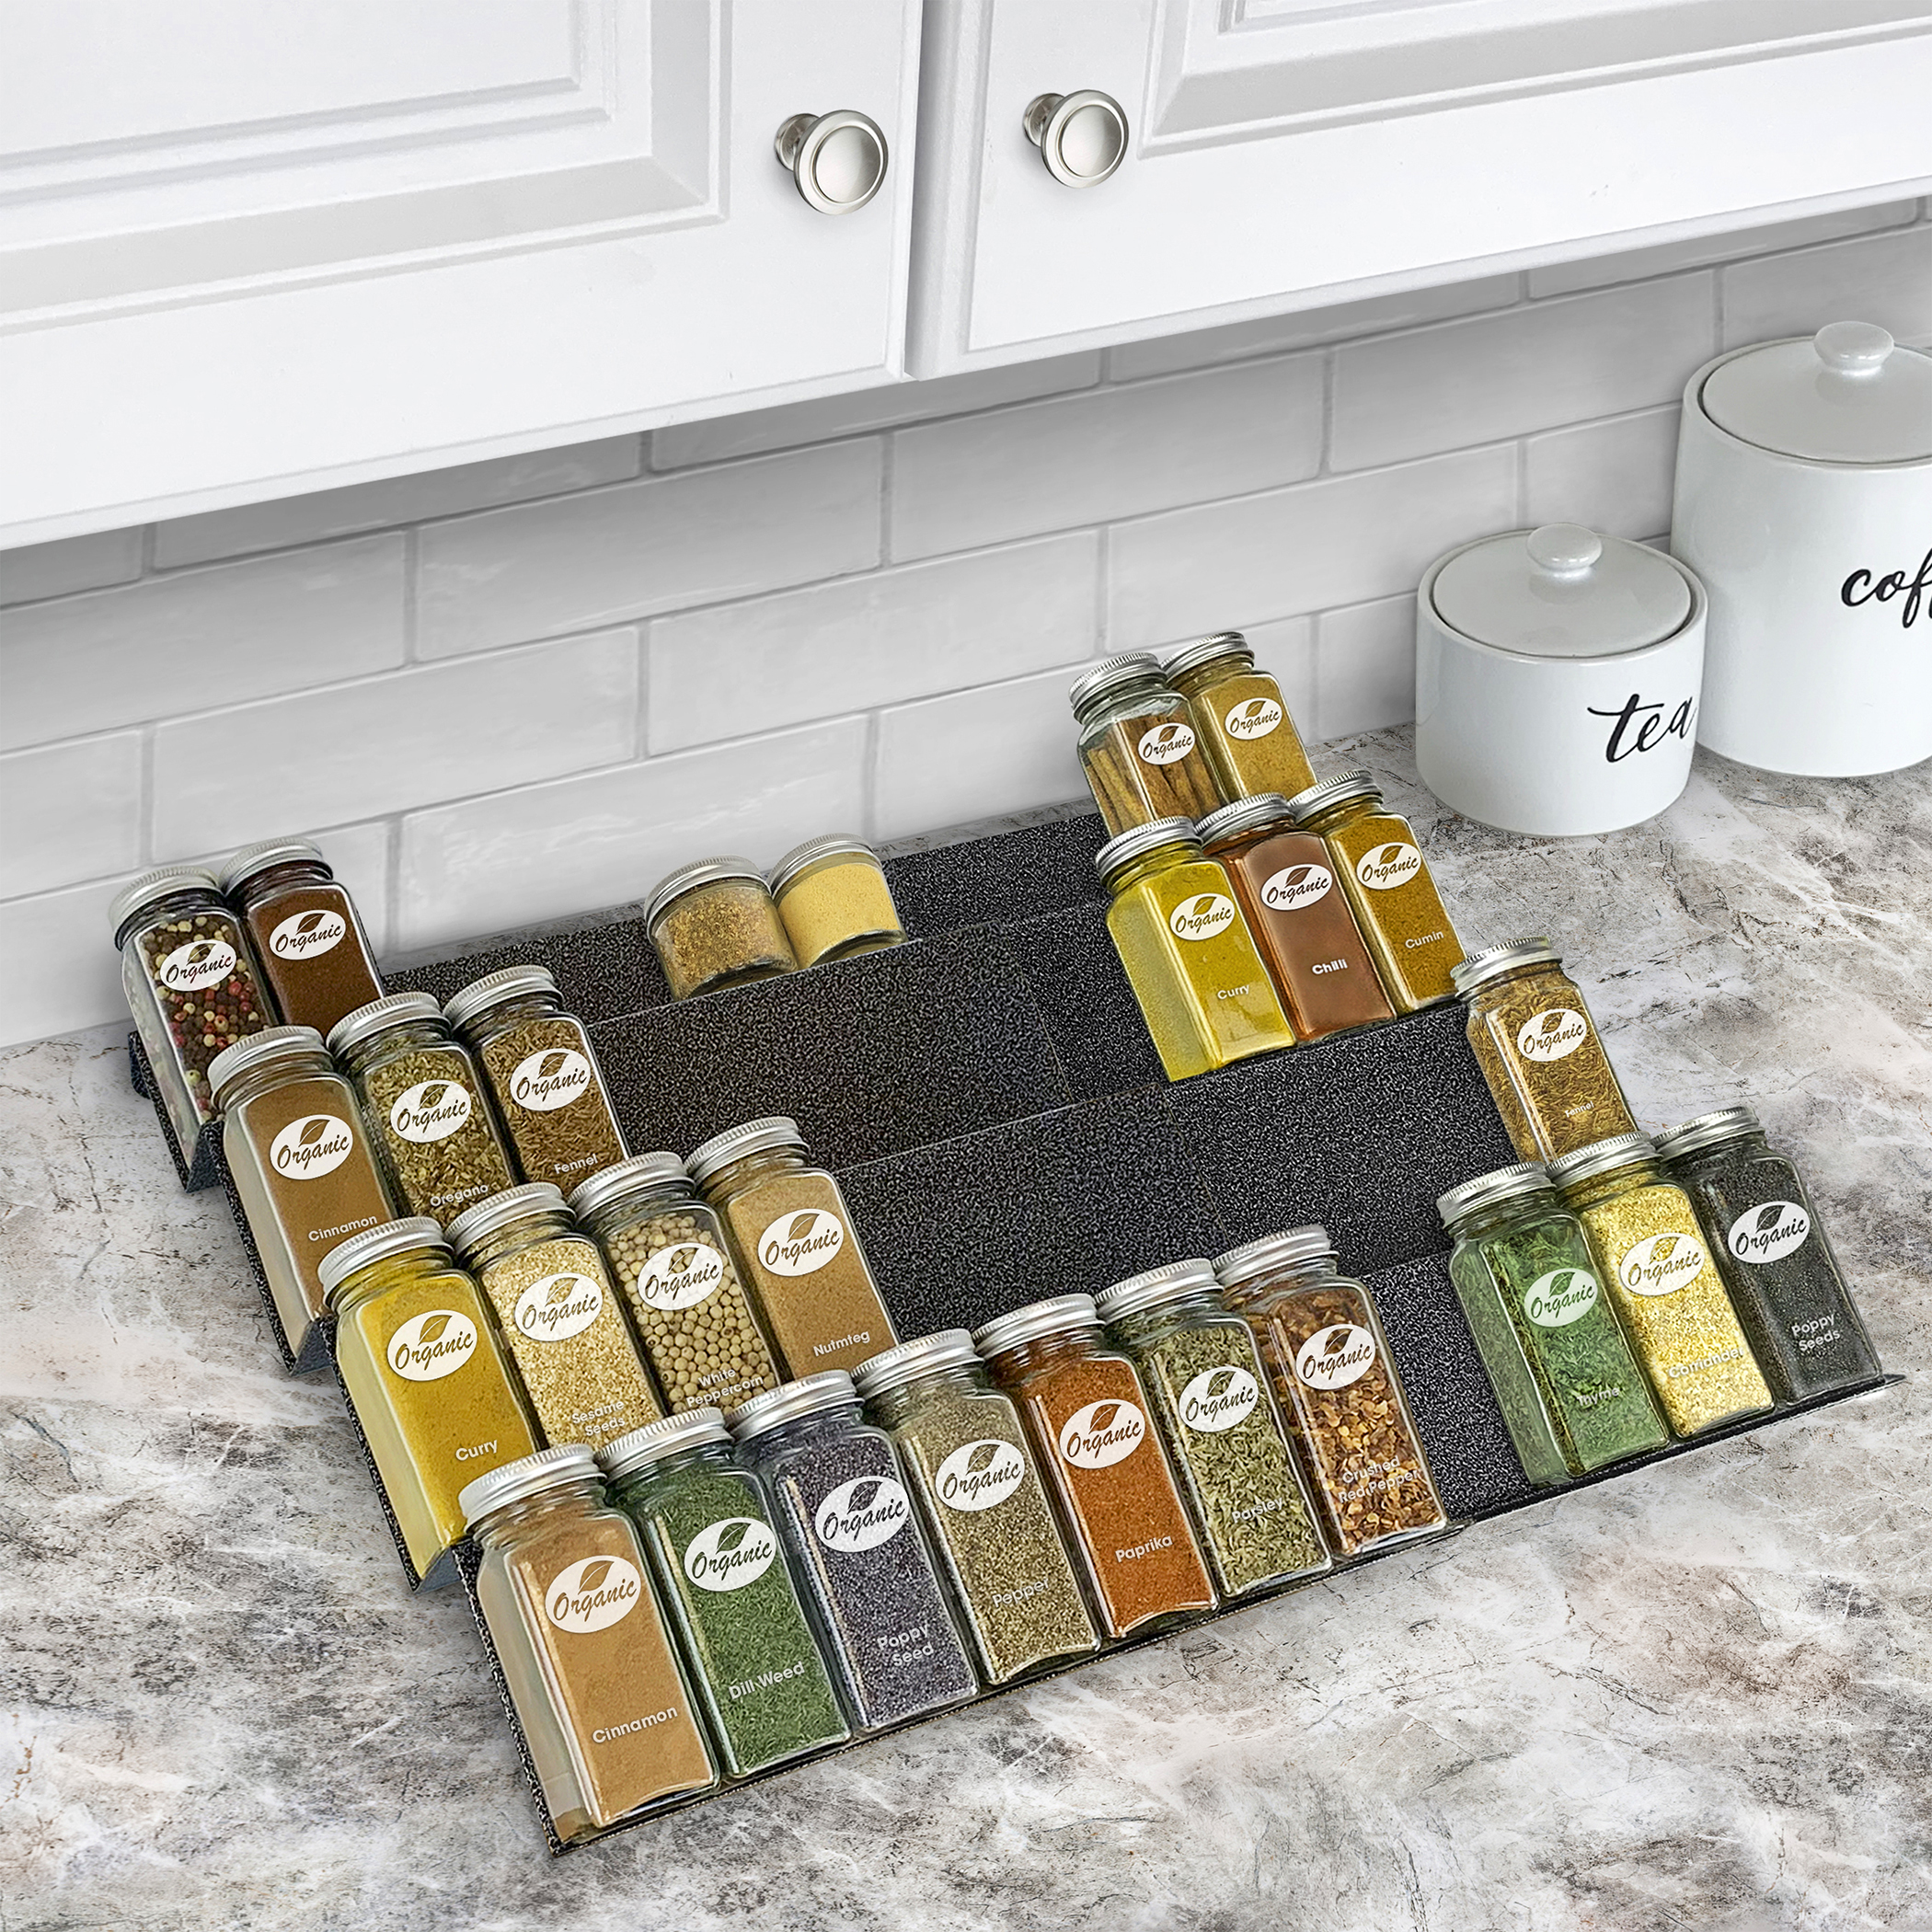 4304142pk Expandable Spice Rack Tray, Lynk Professional Slide Out Spice Rack Upper Cabinet Organizer